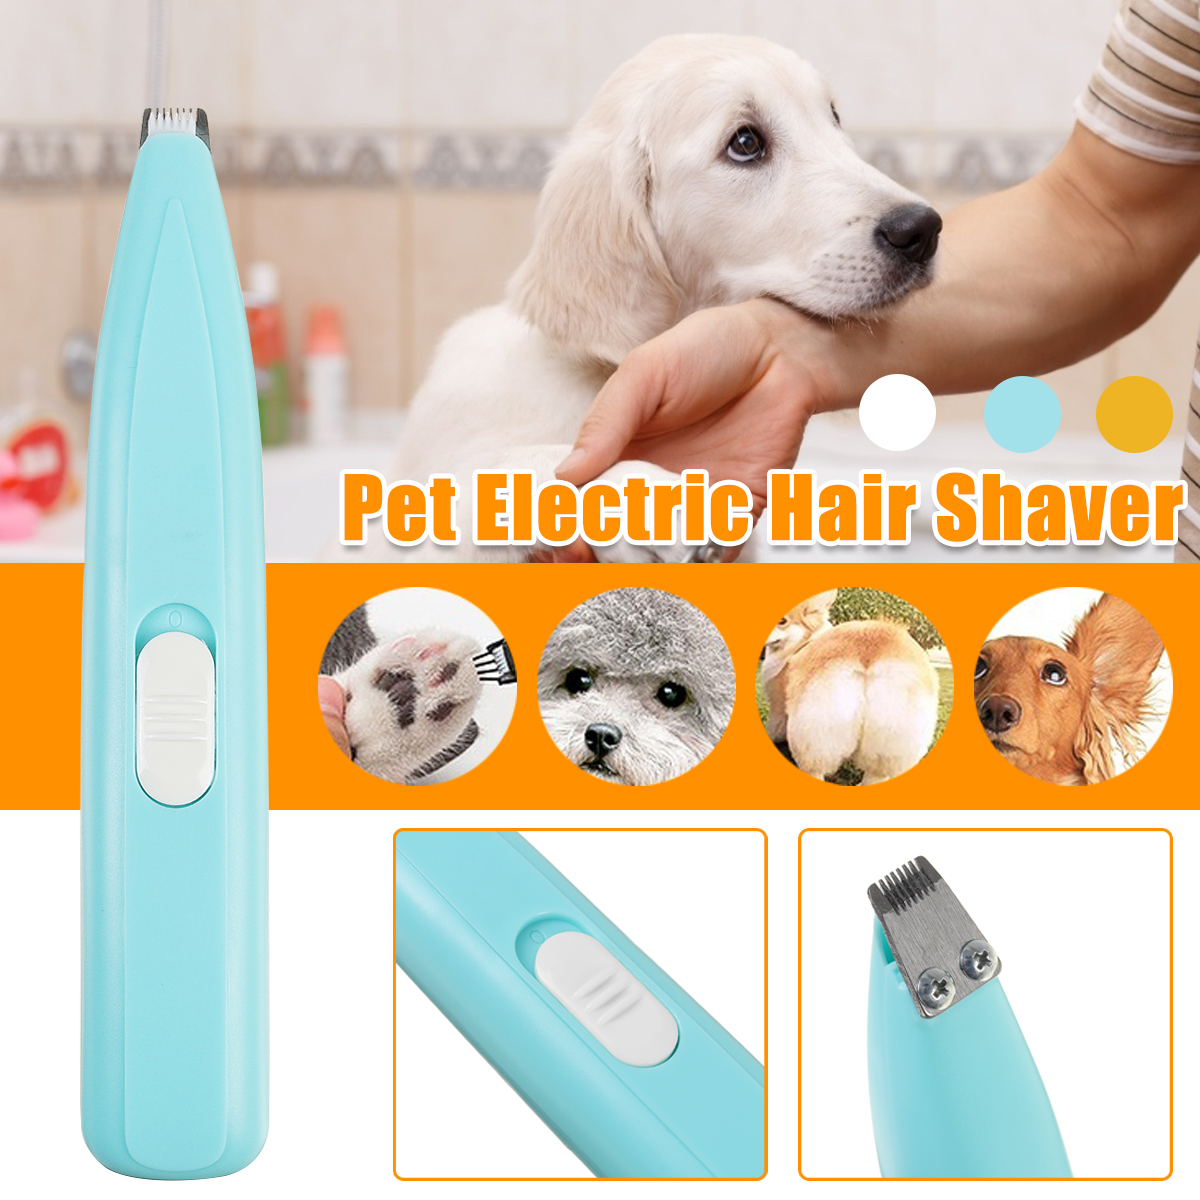 Dog-Cat-Foot-Hair-Trimmer-Pet-Grooming-Electrical-Hair-Clipper-Shaving-Trimming-Pet-Supplies-1940485-1